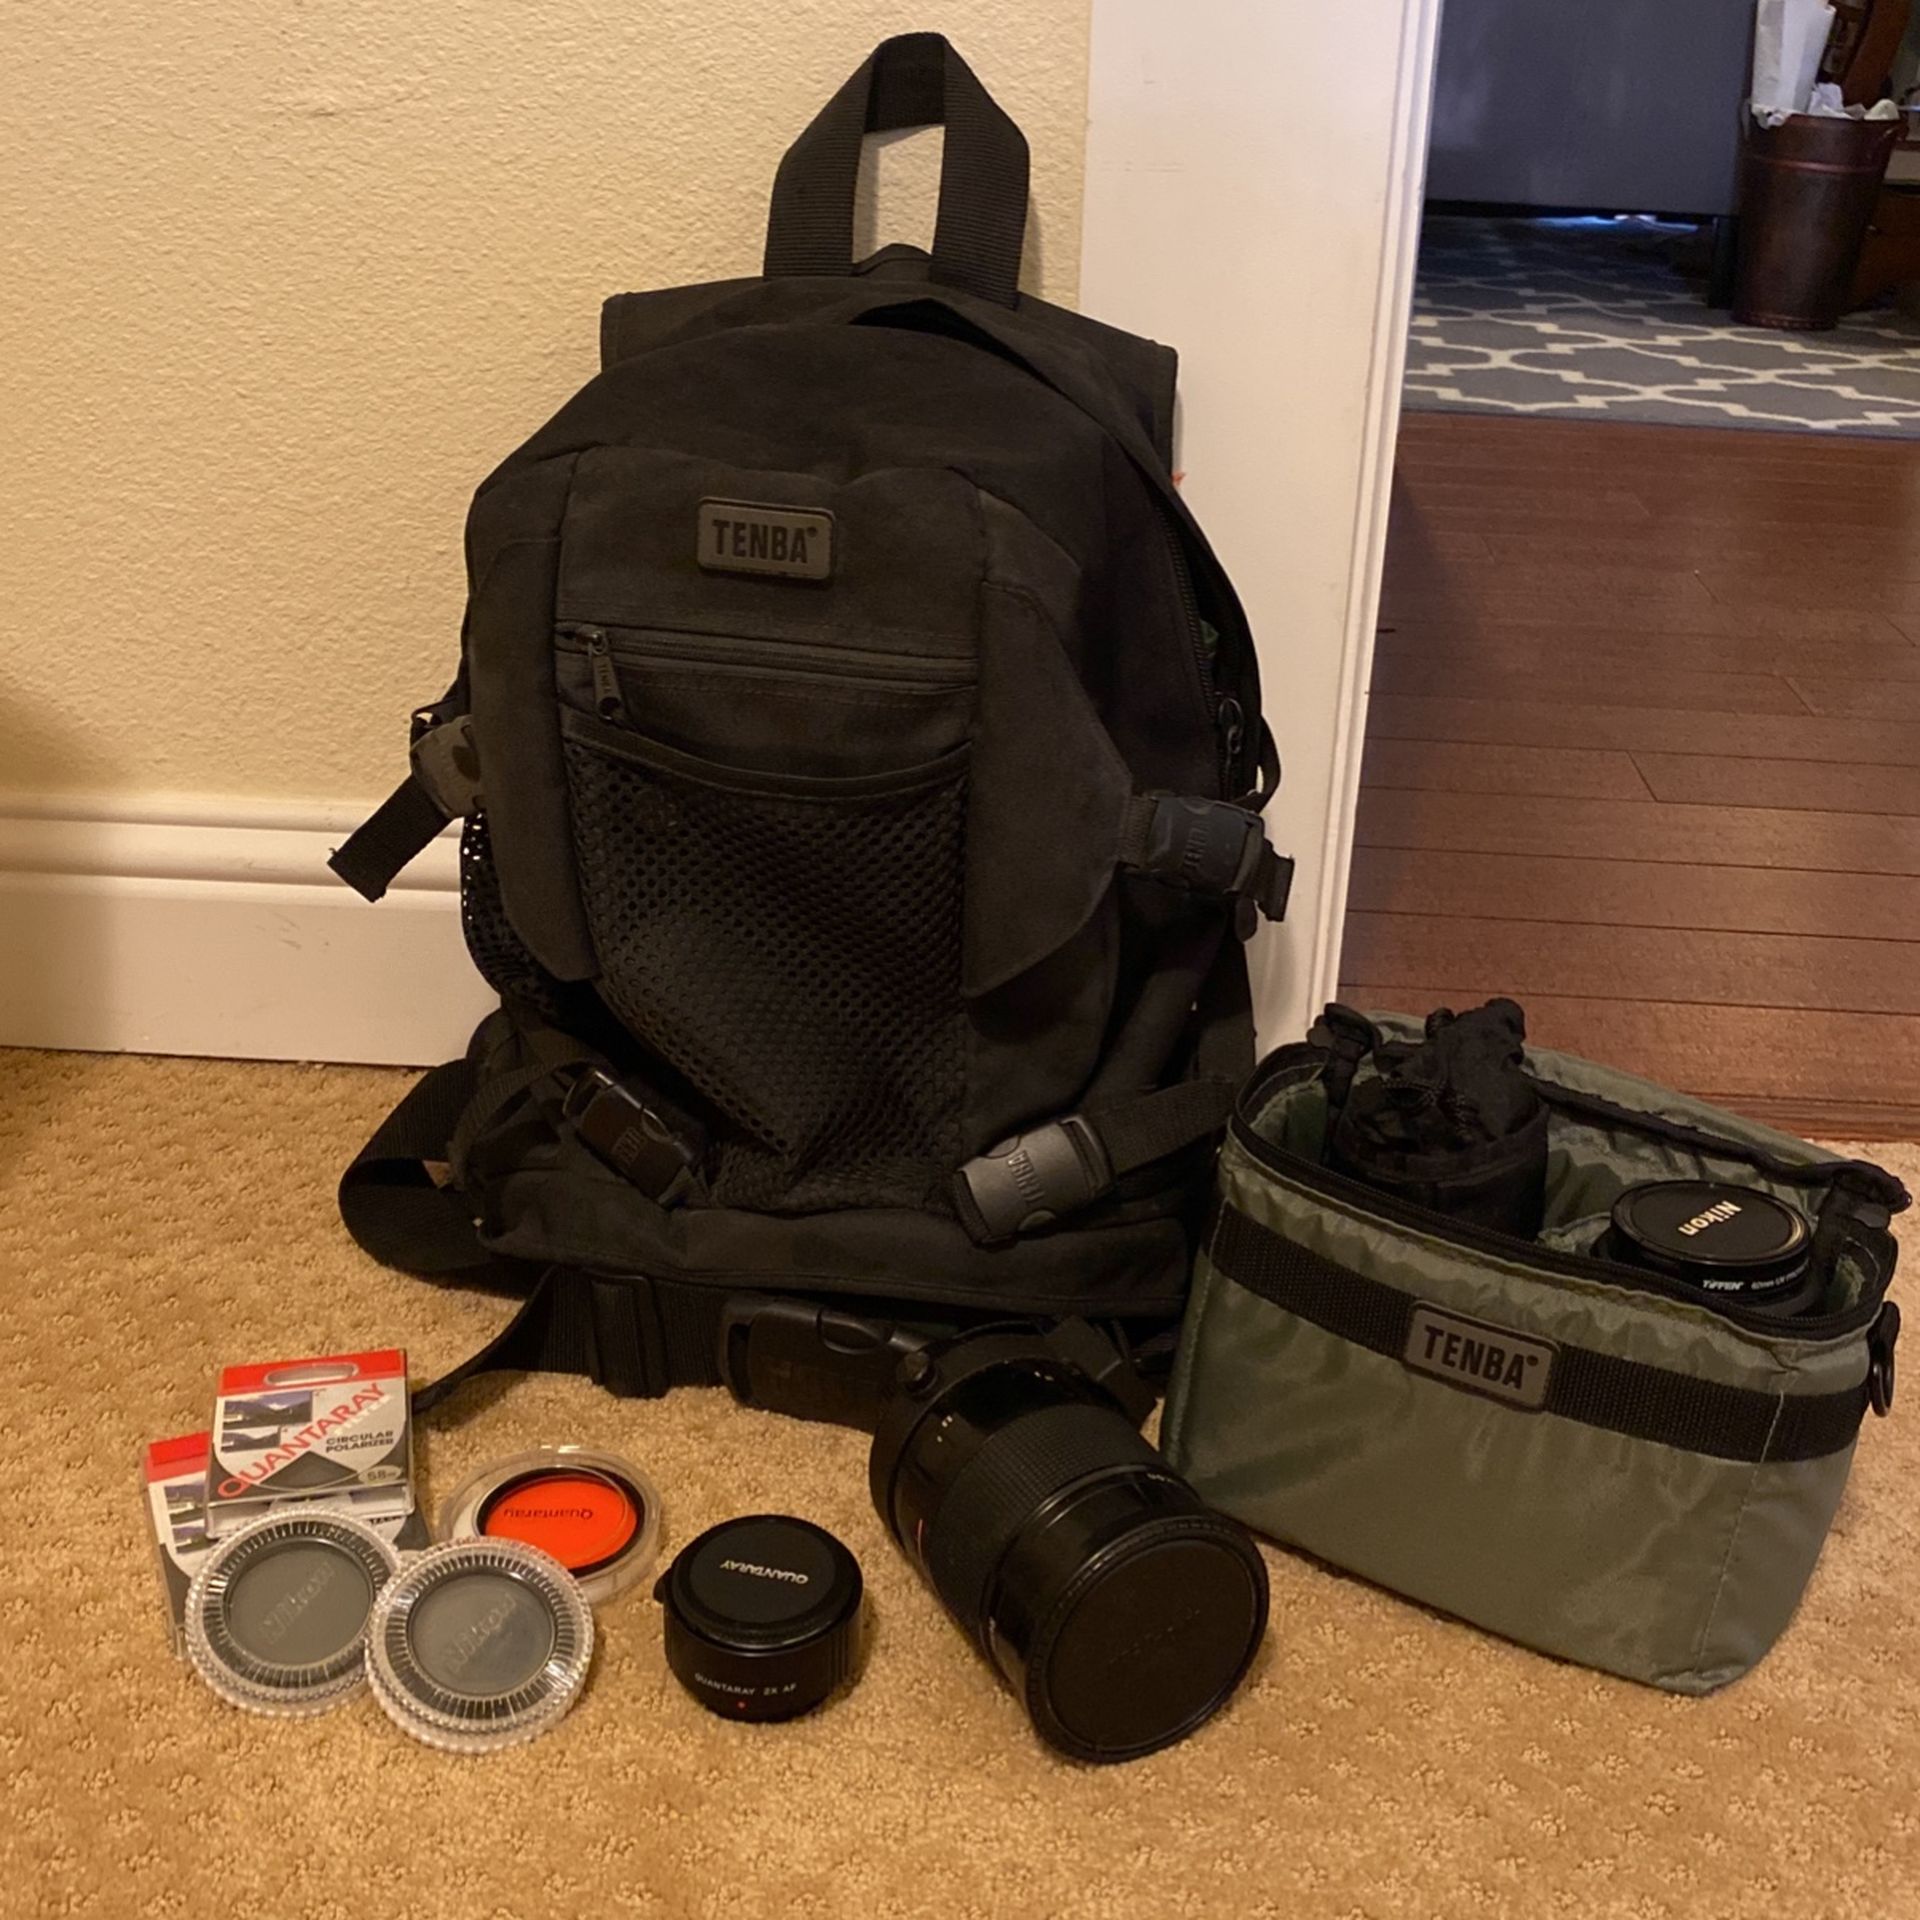 Camera Equipment And Backpack